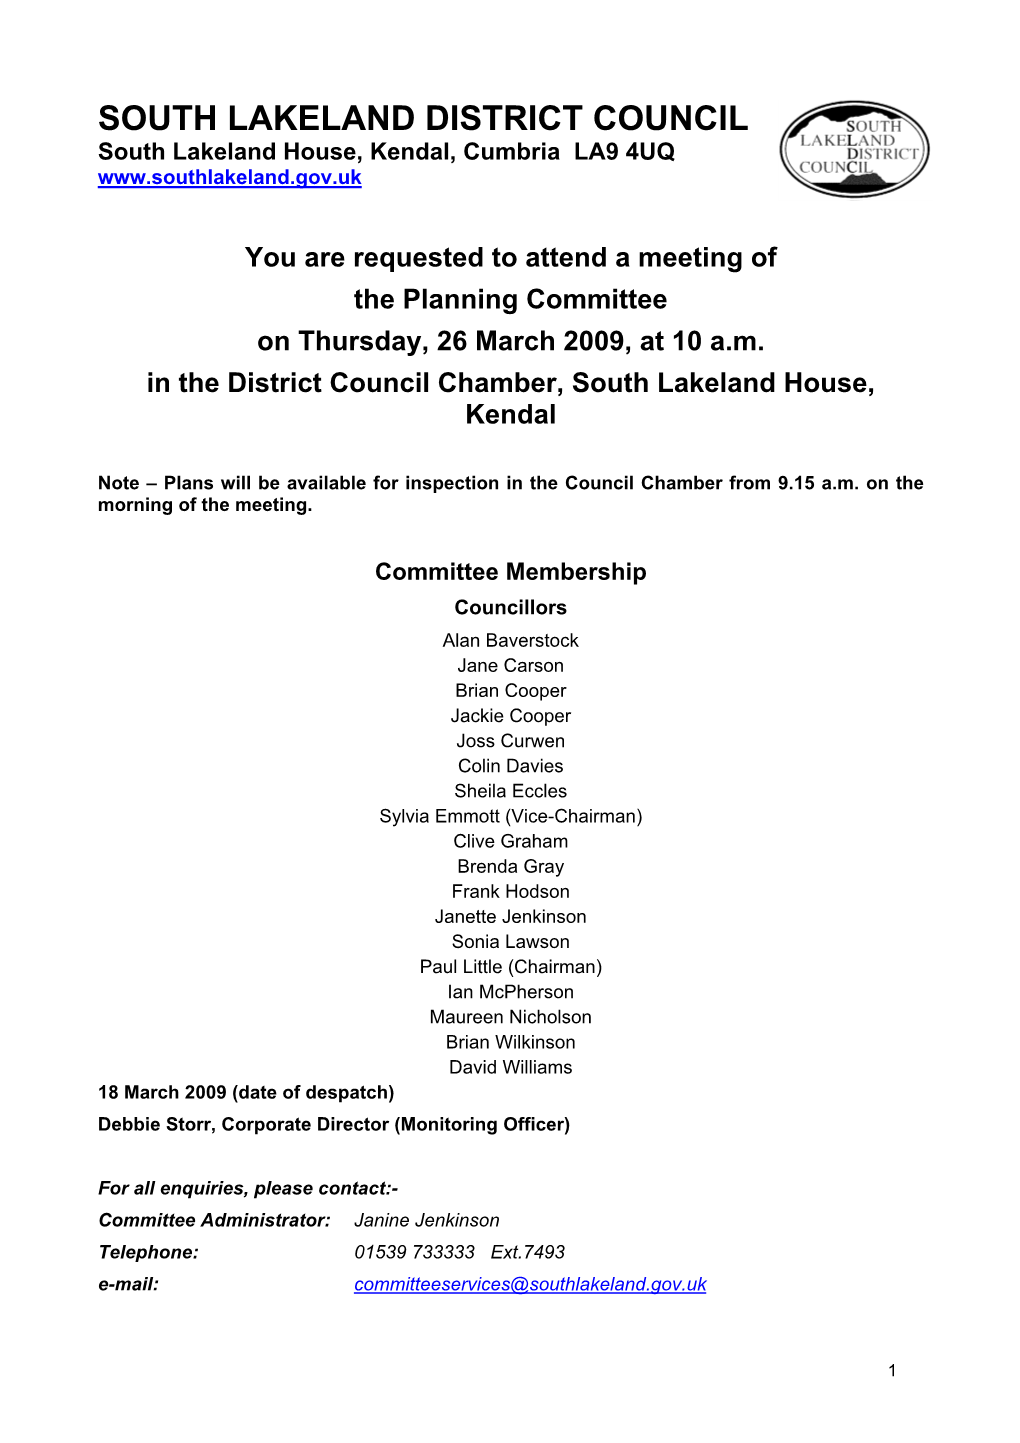 09-03-26 Planning Committee Agenda and Part L Reports PDF